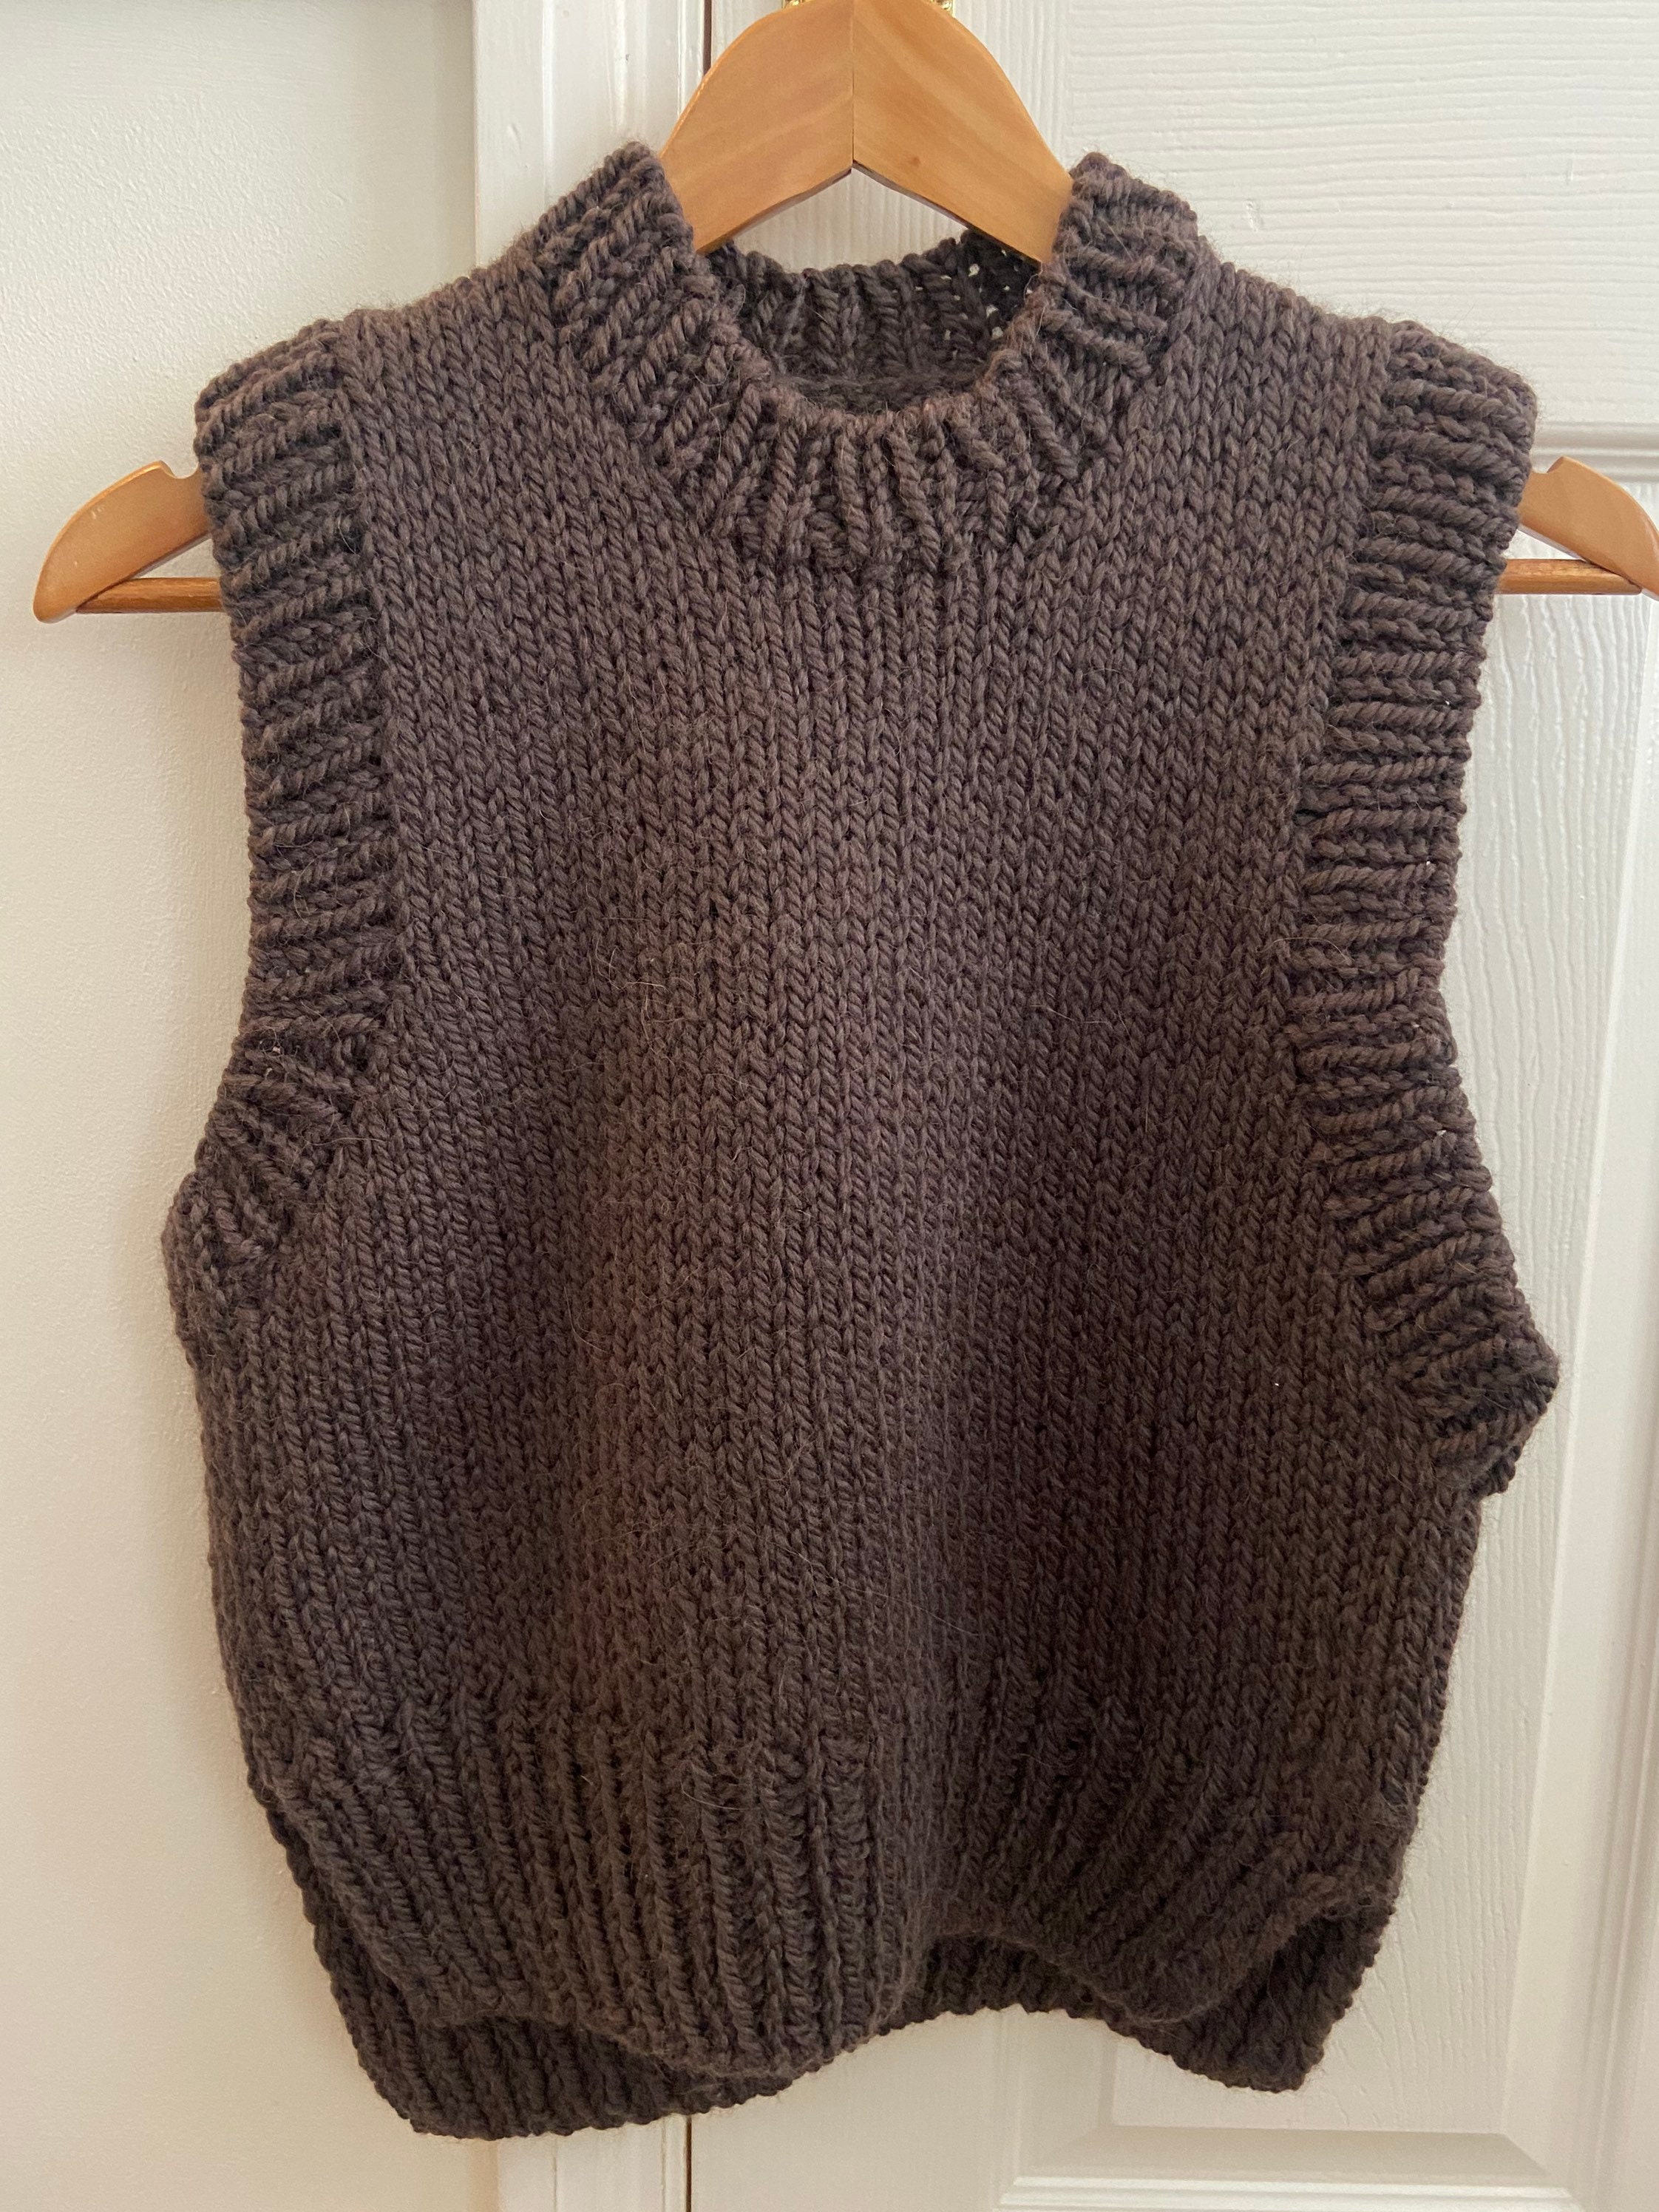 Hand knitted sweater vest | Etsy